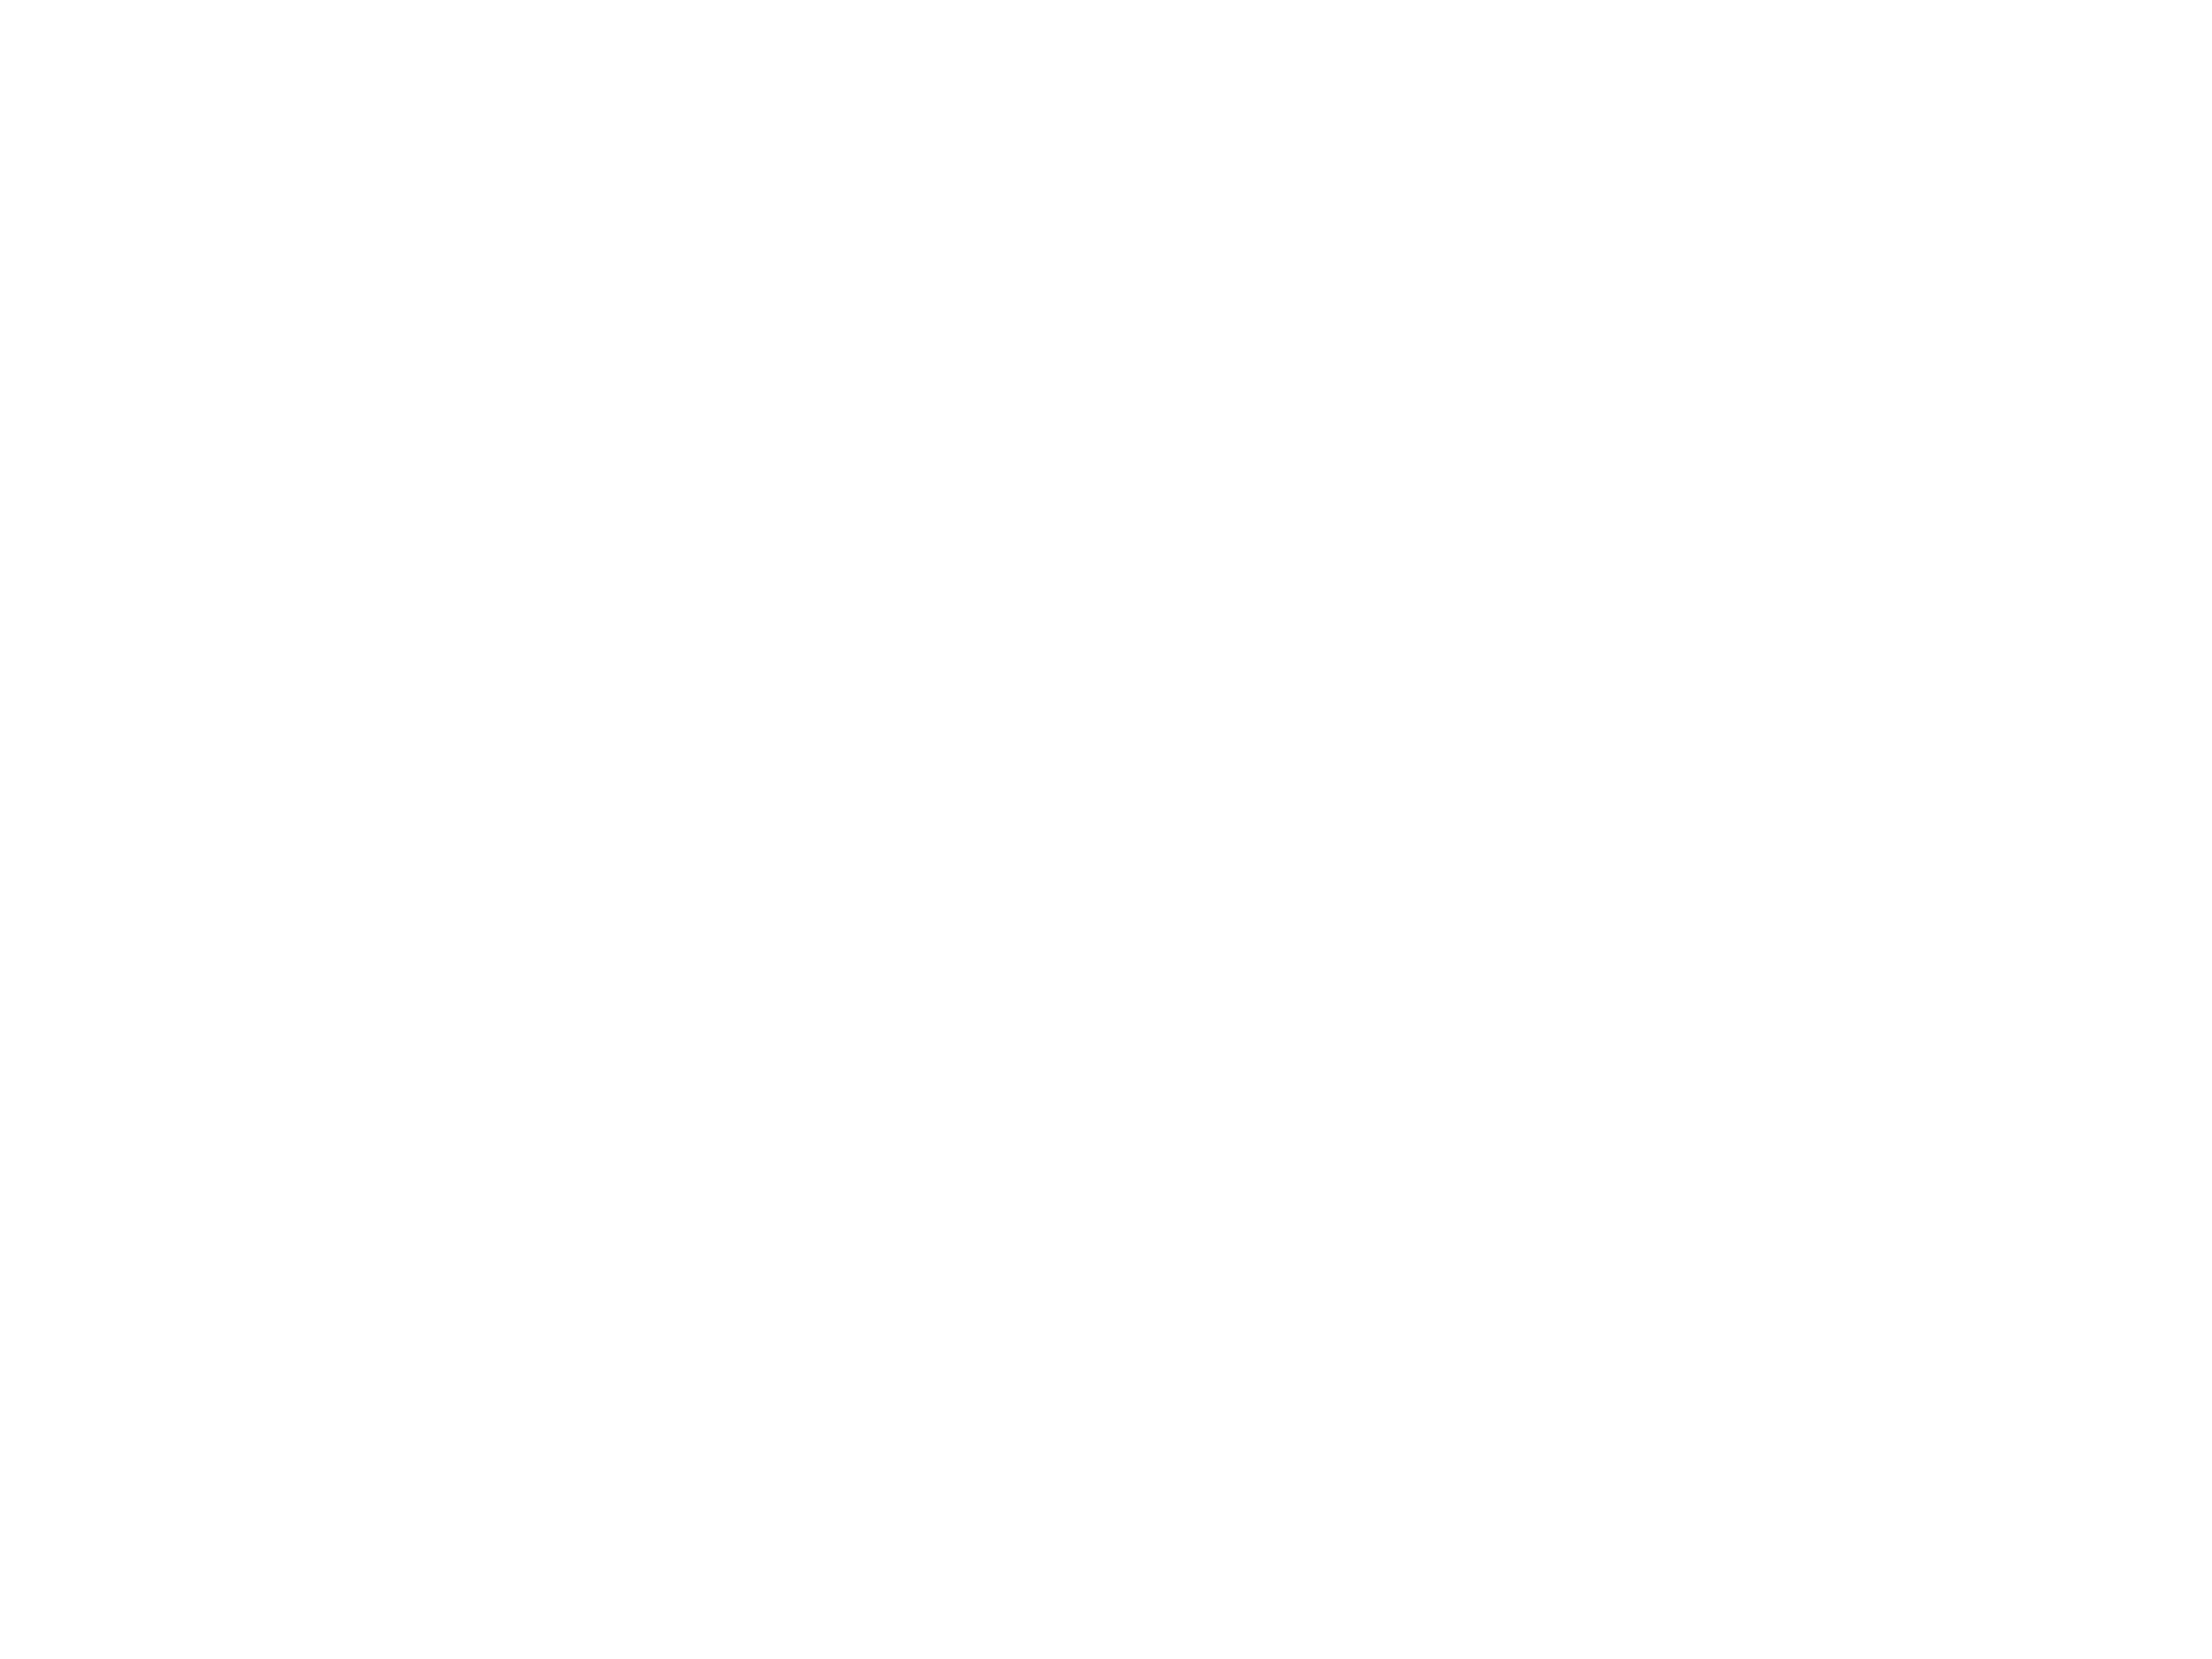 Righter